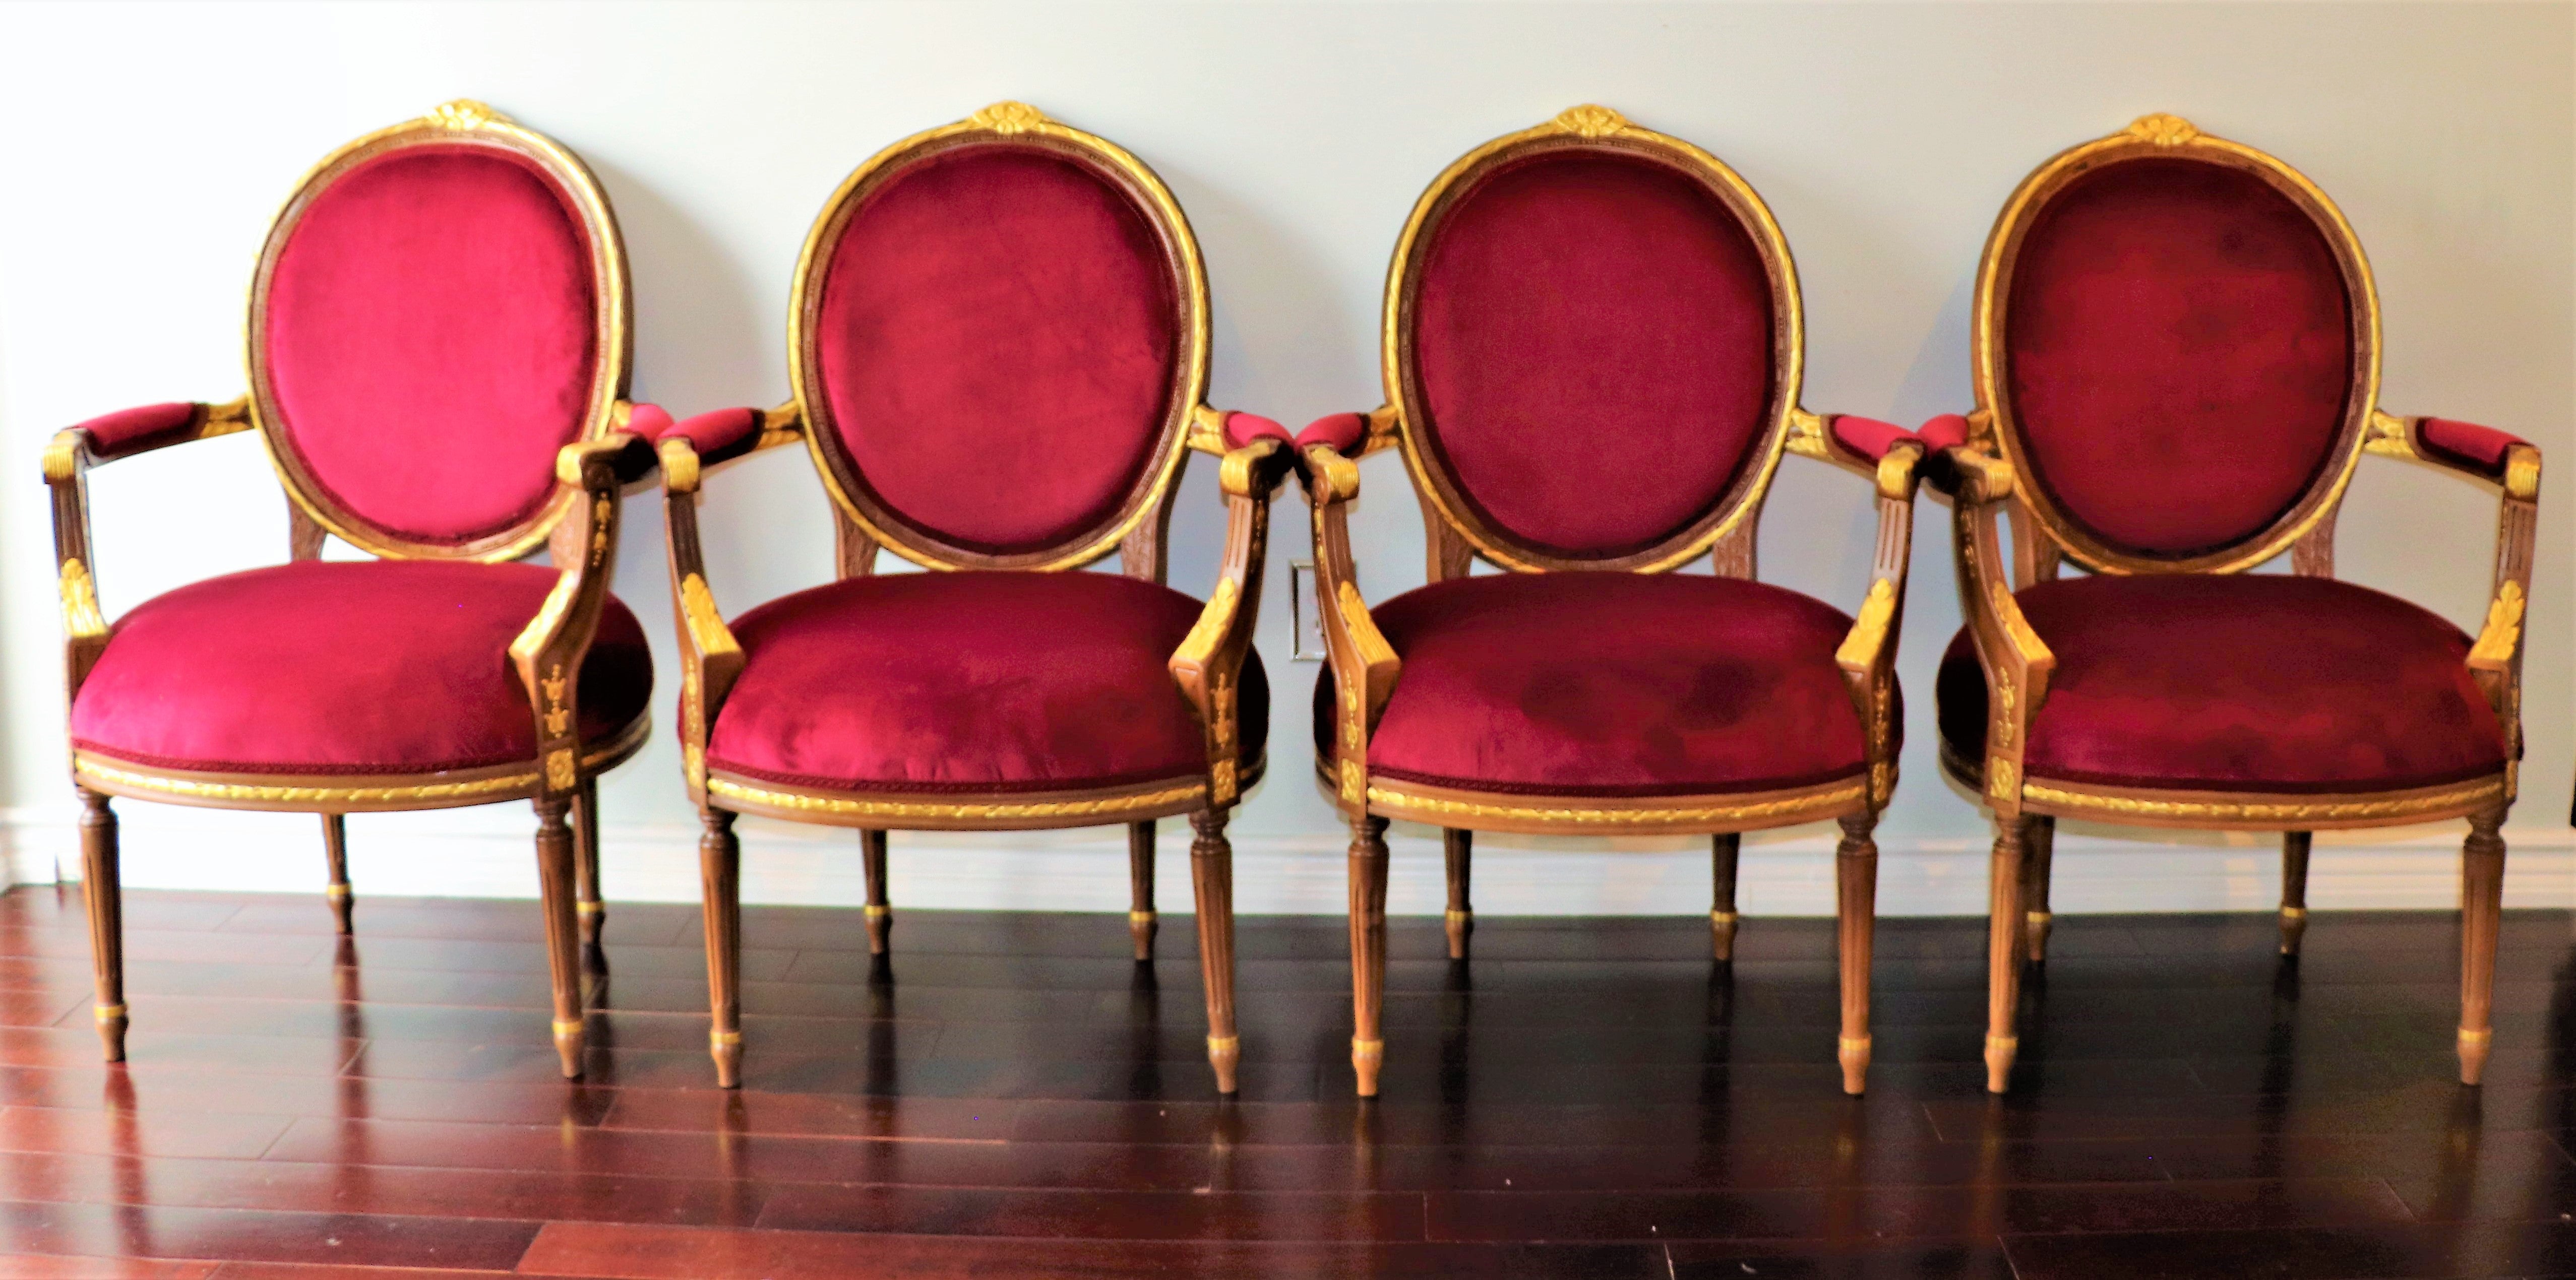 French Provincial Chair Set - Louis XV Style